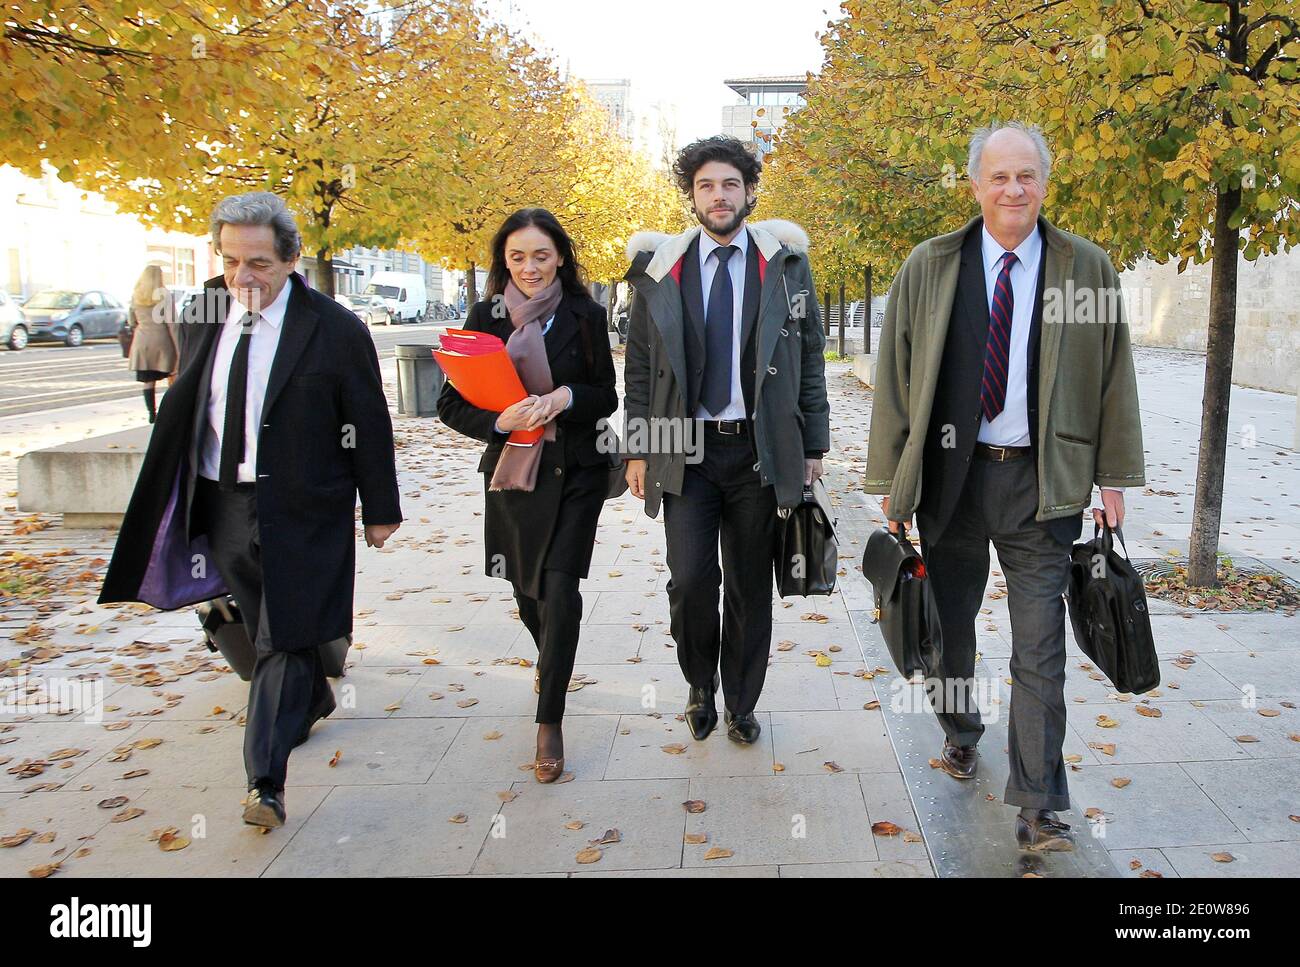 L'Oreal heiress French Lilian Bettencourt's former financial advisor  Patrice de Maistre (R) arrives flanked by his lawyer Christophe Carriou  Martin, Jacqueline Laffont and Pierre Haik prior to a hearing by judge Jean -Michel